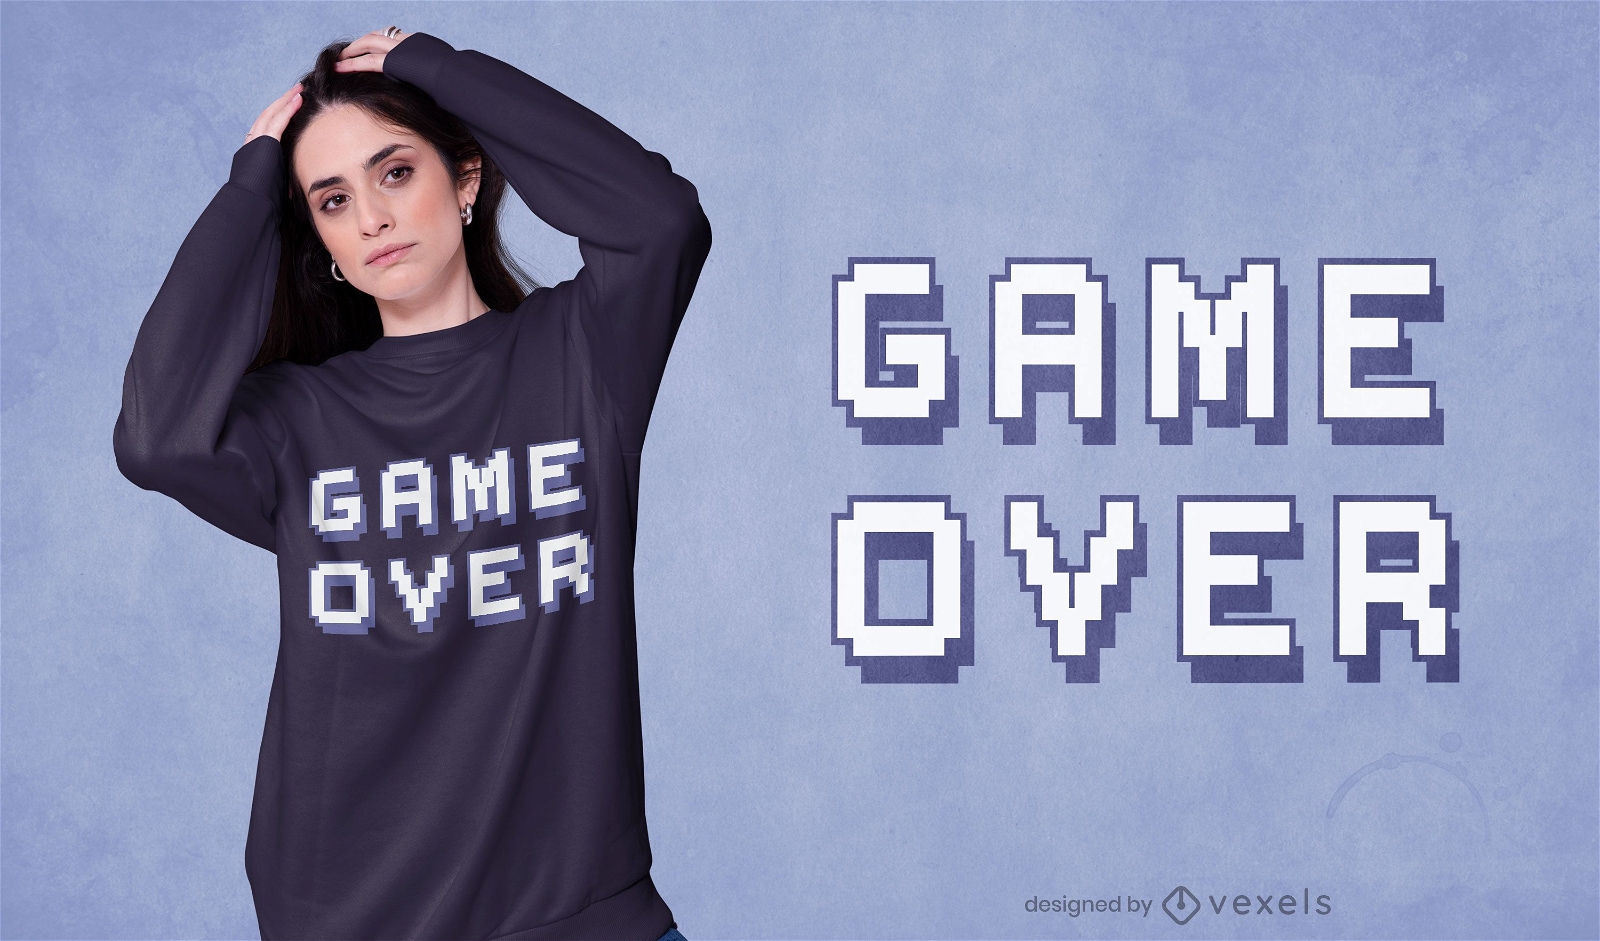 Game over quote t-shirt design